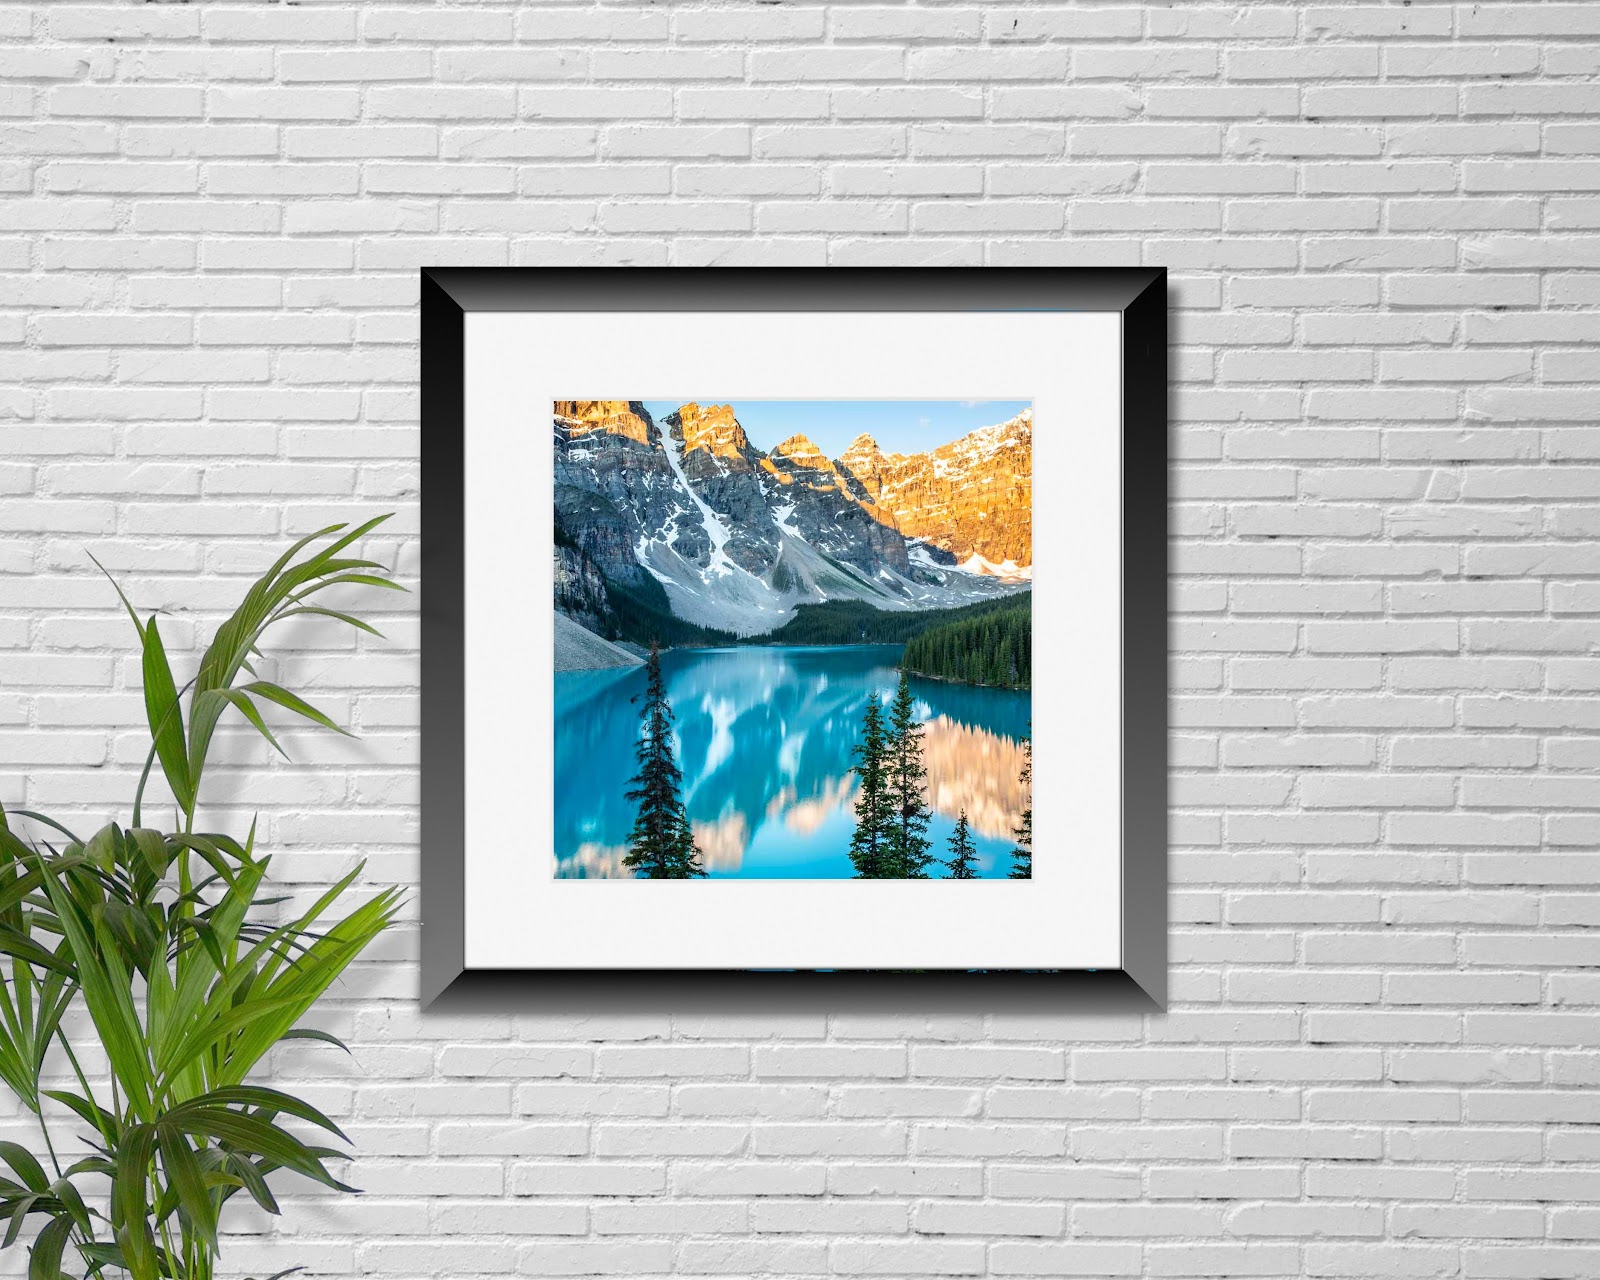 landscape photo in a simple frame